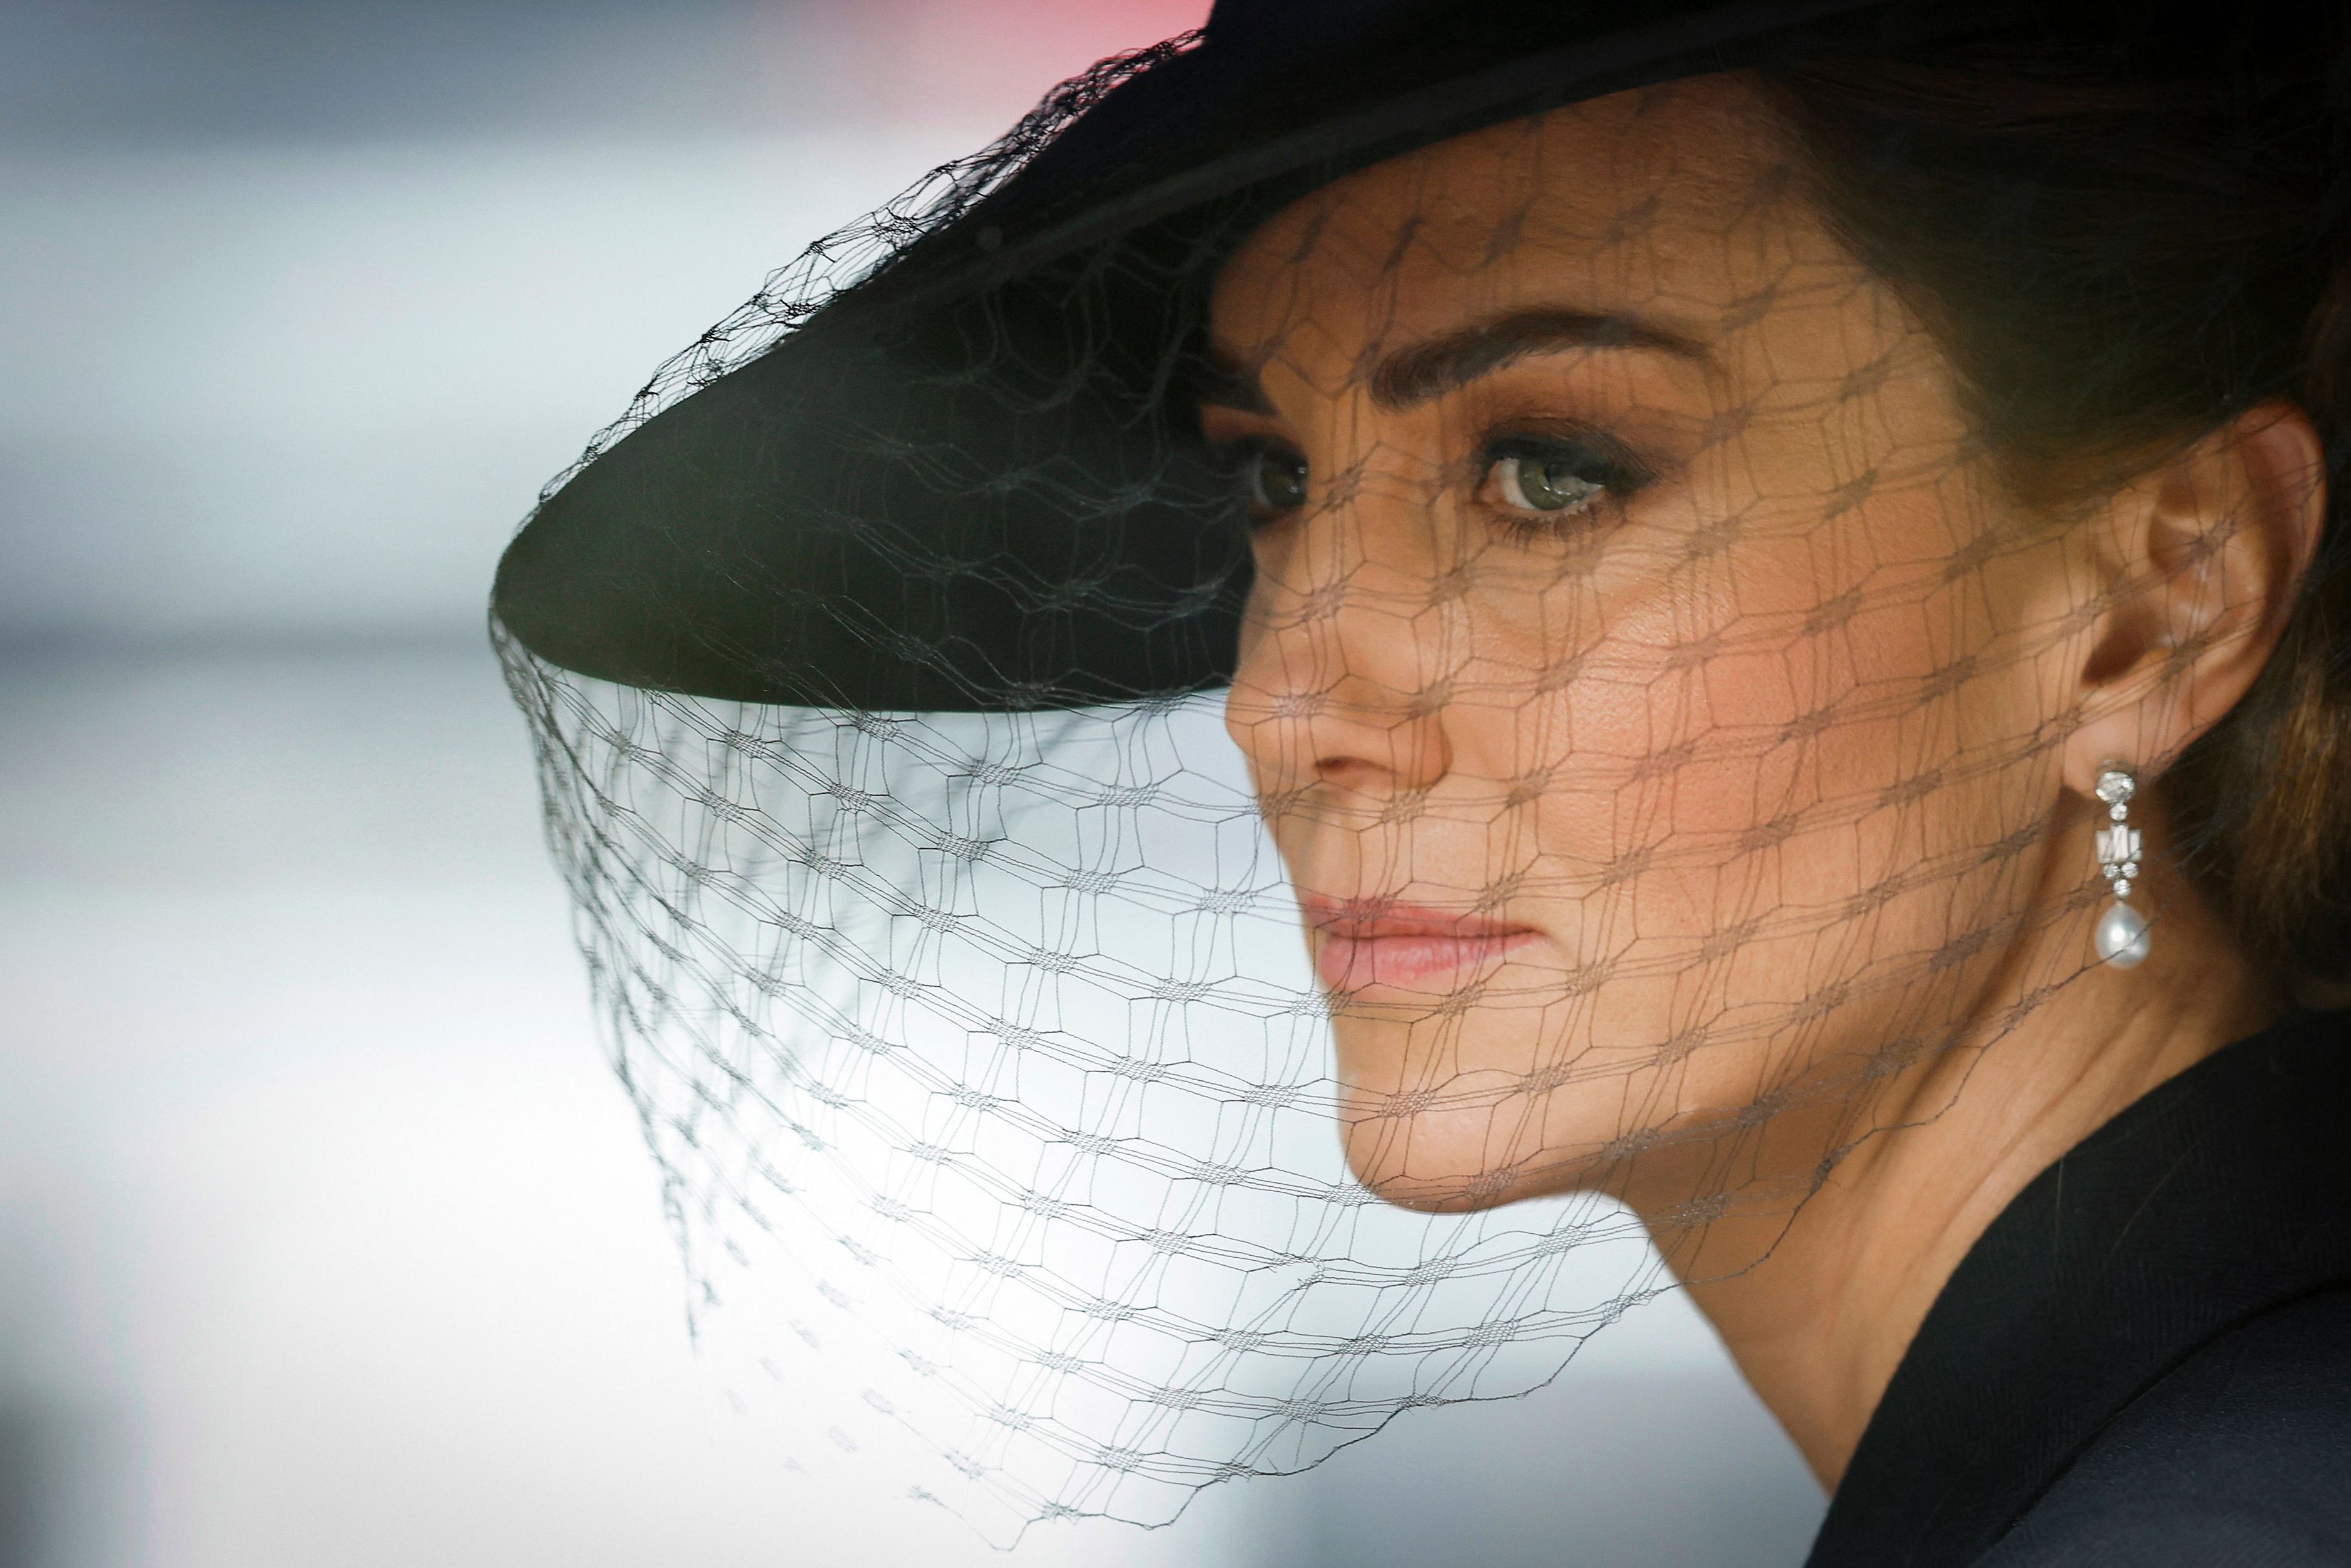 <p>Princess Kate rode in Queen Elizabeth II's <a href="https://www.wonderwall.com/celebrity/royals/best-photos-from-queen-elizabeth-ii-funeral-king-charles-princes-william-prince-harry-george-charlotte-kate-meghan652347.gallery">funeral cortege</a> near Marlborough Gate in London as it made its way through London and continued to Windsor, England, for a committal ceremony and burial at St. George's Chapel at Windsor Castle, on Sept. 19, 2022.</p>